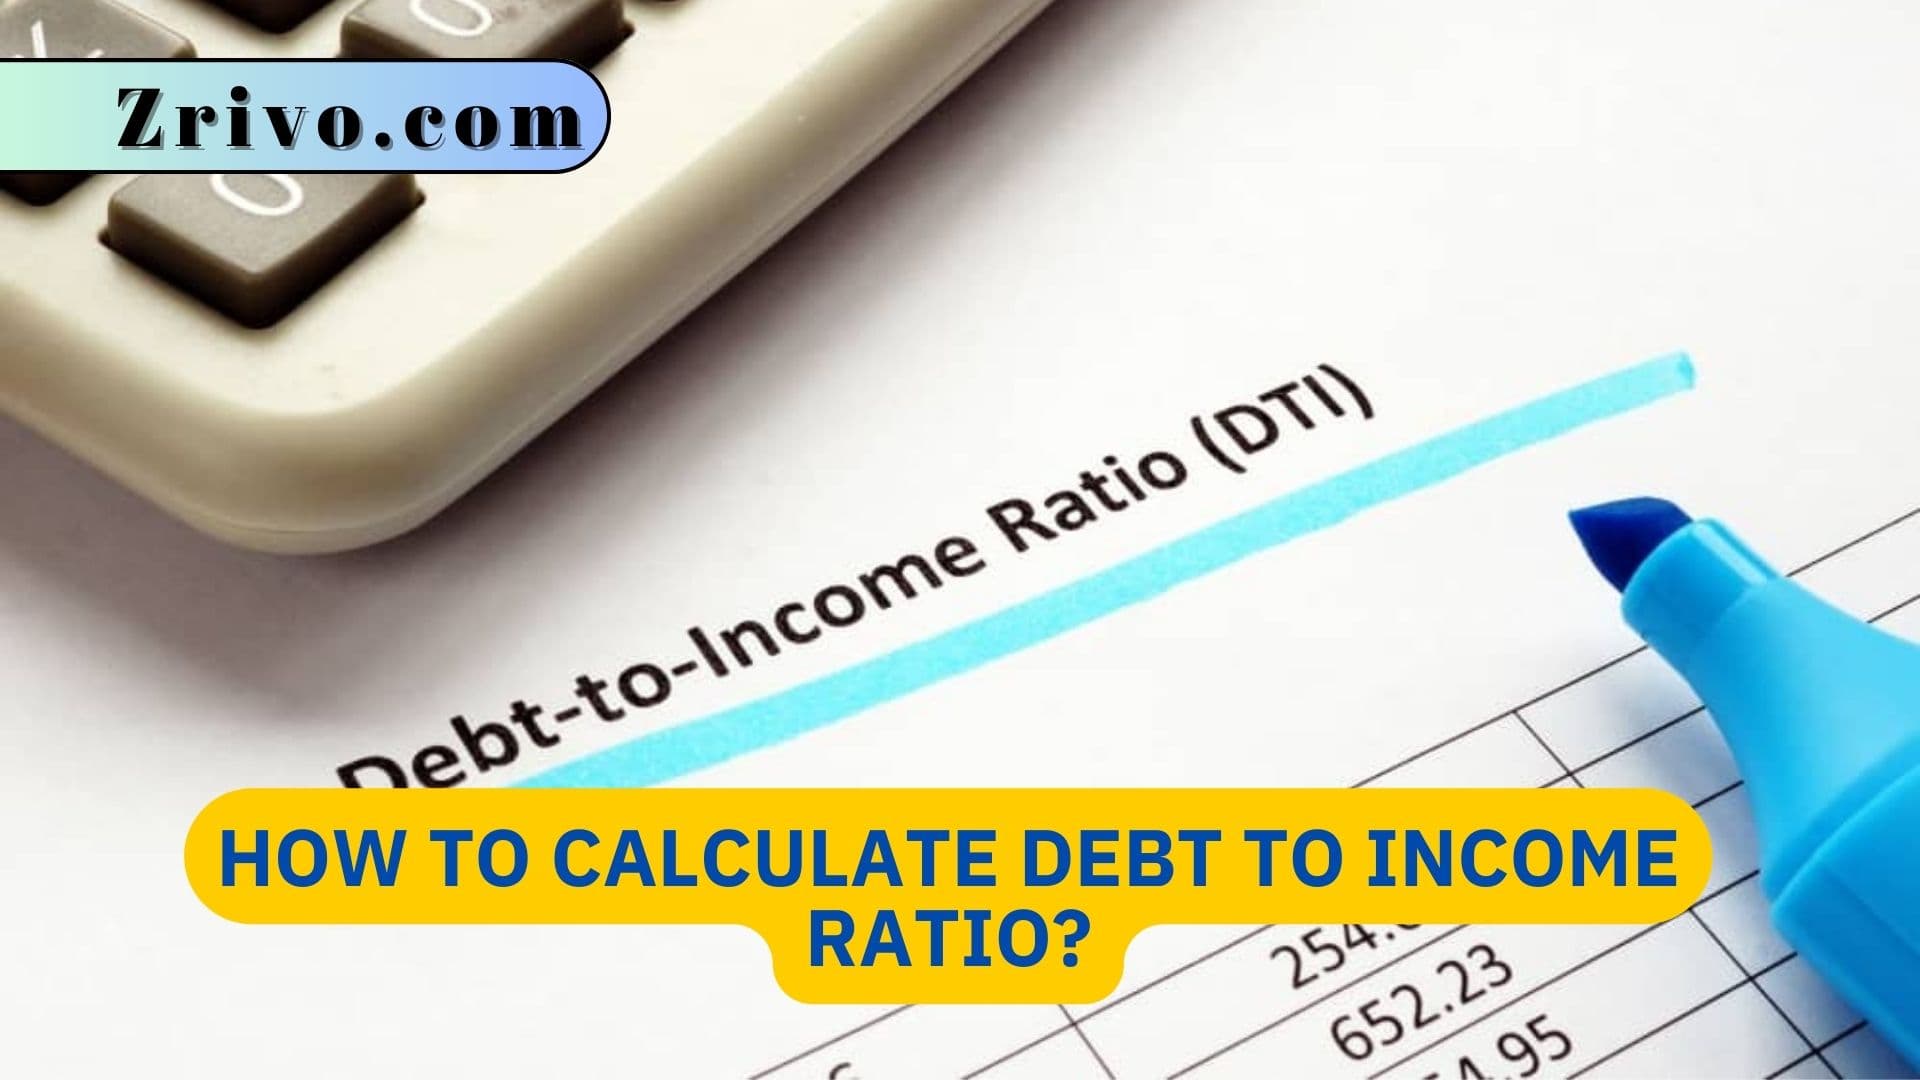 How to Calculate Debt to Income Ratio